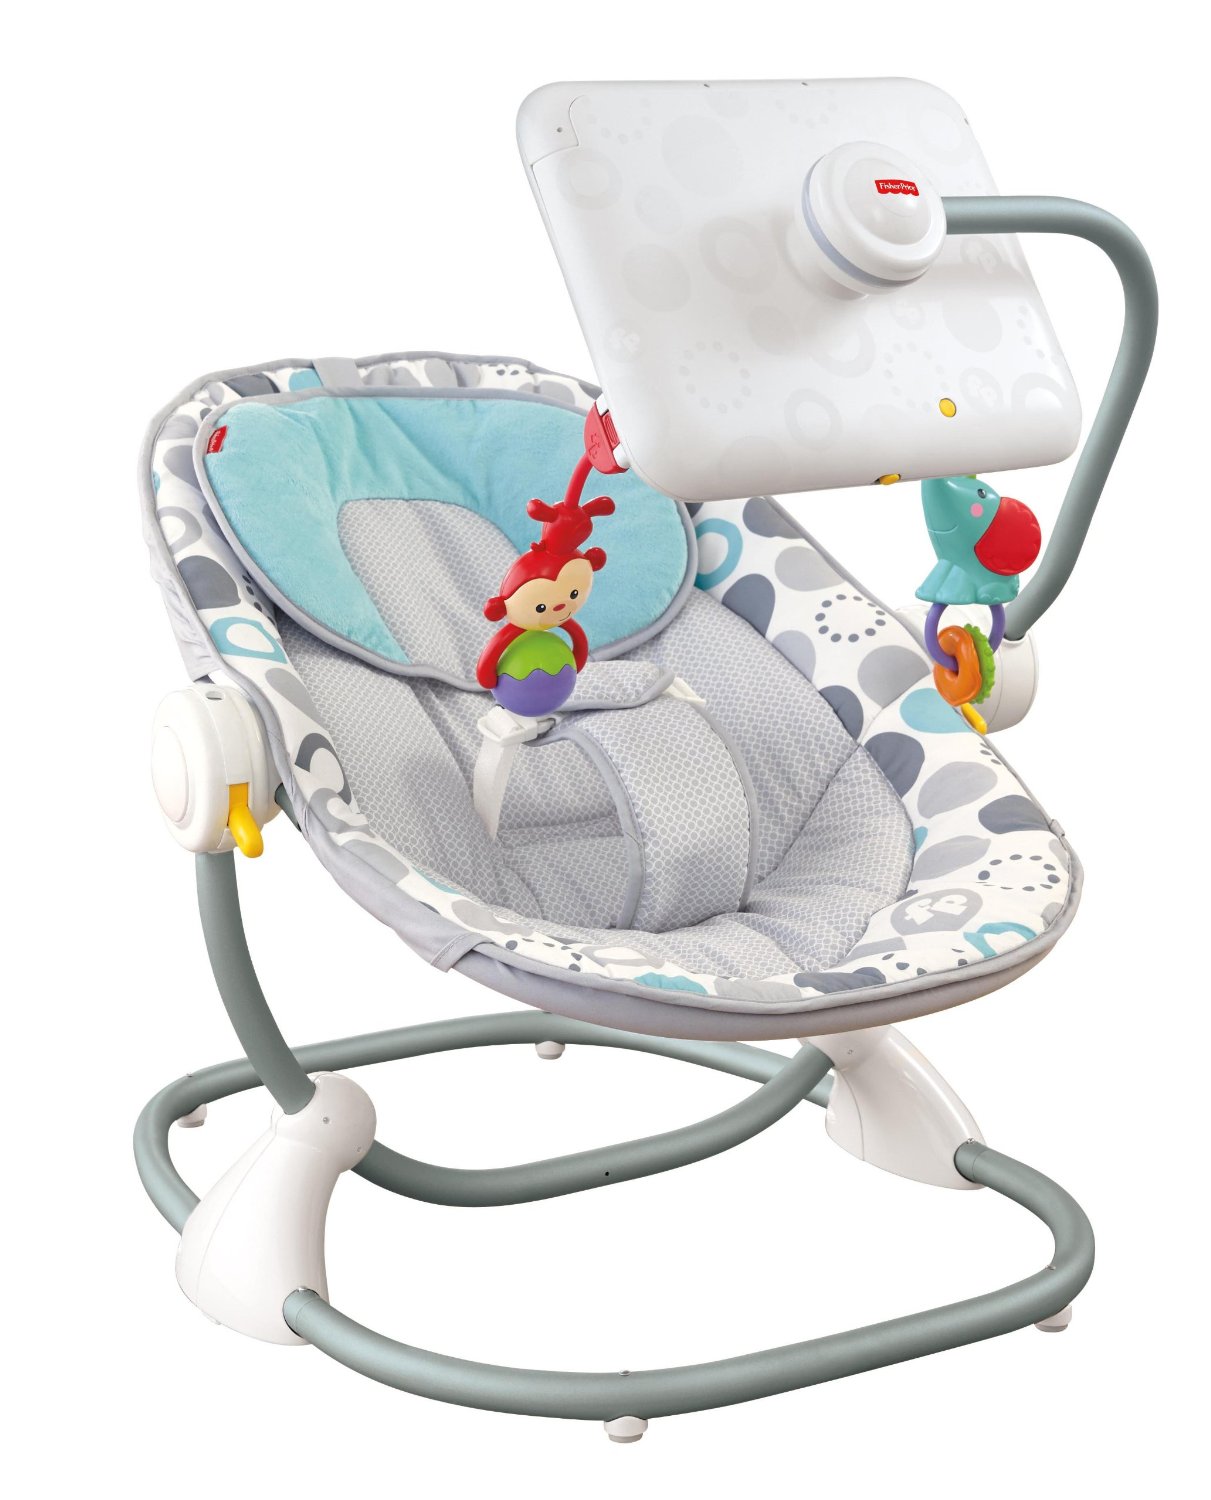 Fisher-Price Offers Apptivity iPad Seat for Infants, Upsets Parents